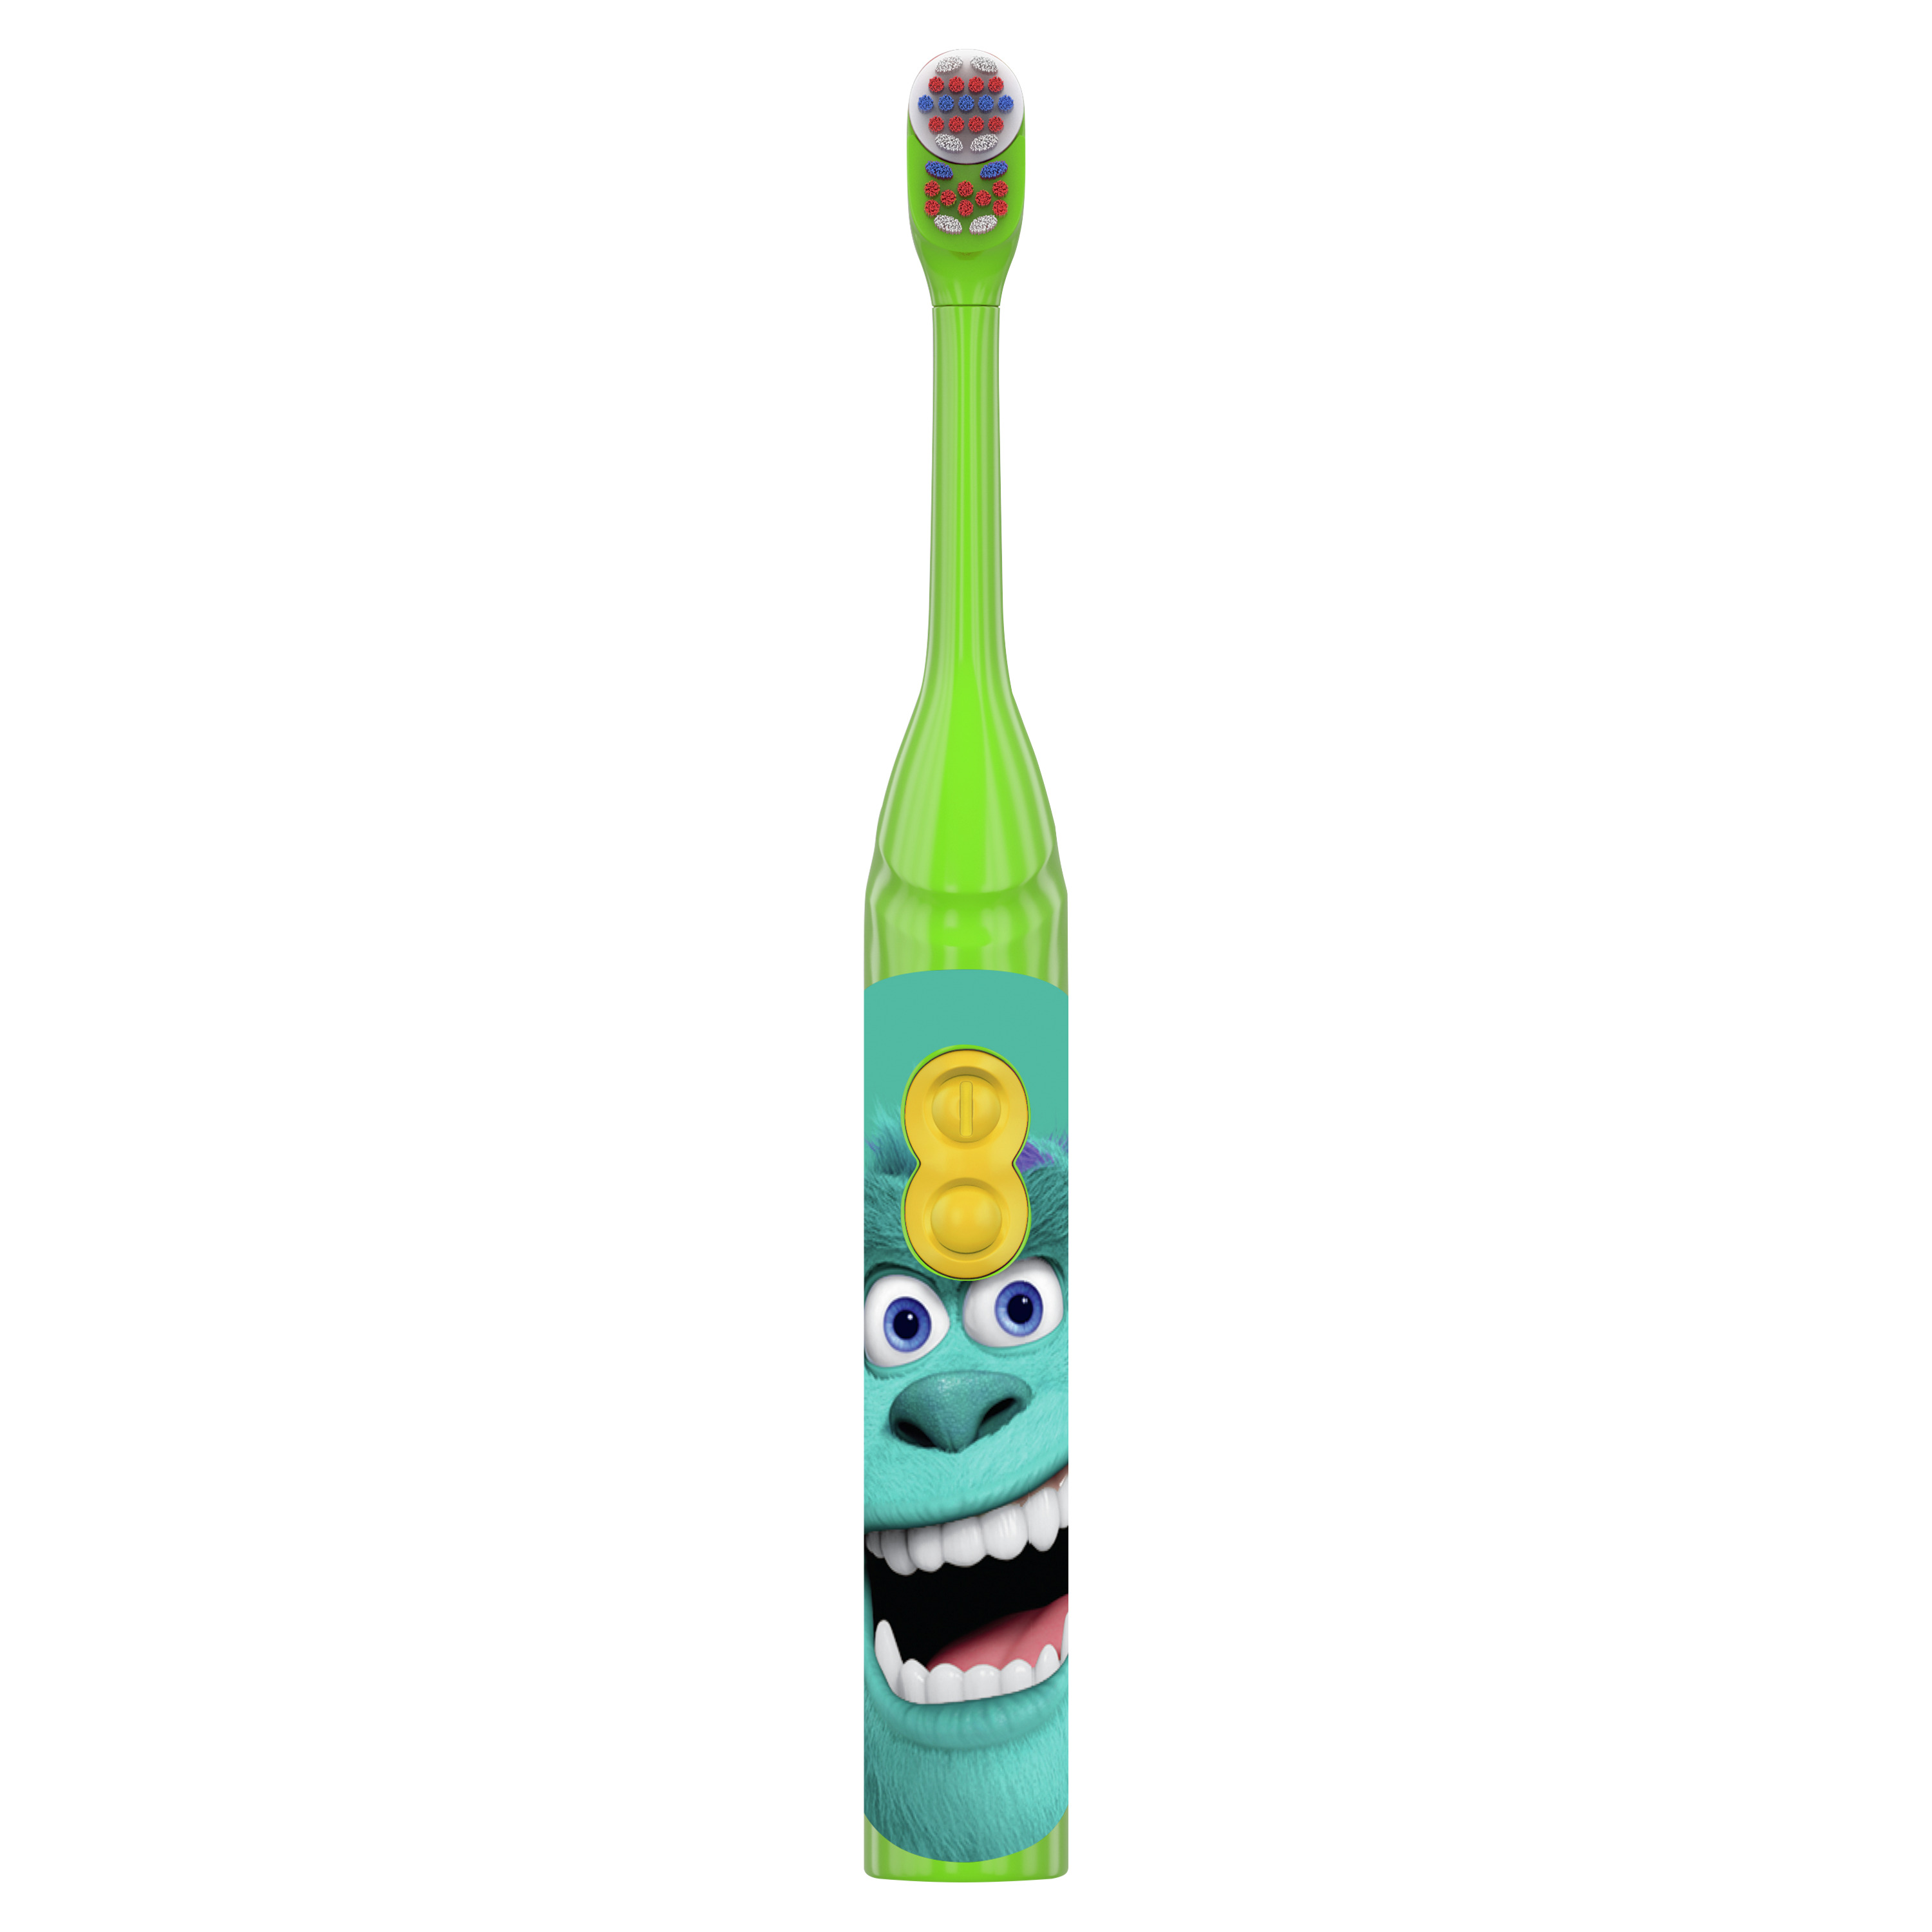 Oral-B Kid's Battery Toothbrush Featuring PIXAR Favorites, Full Head, Soft Bristles, for Children 3+ - image 2 of 9